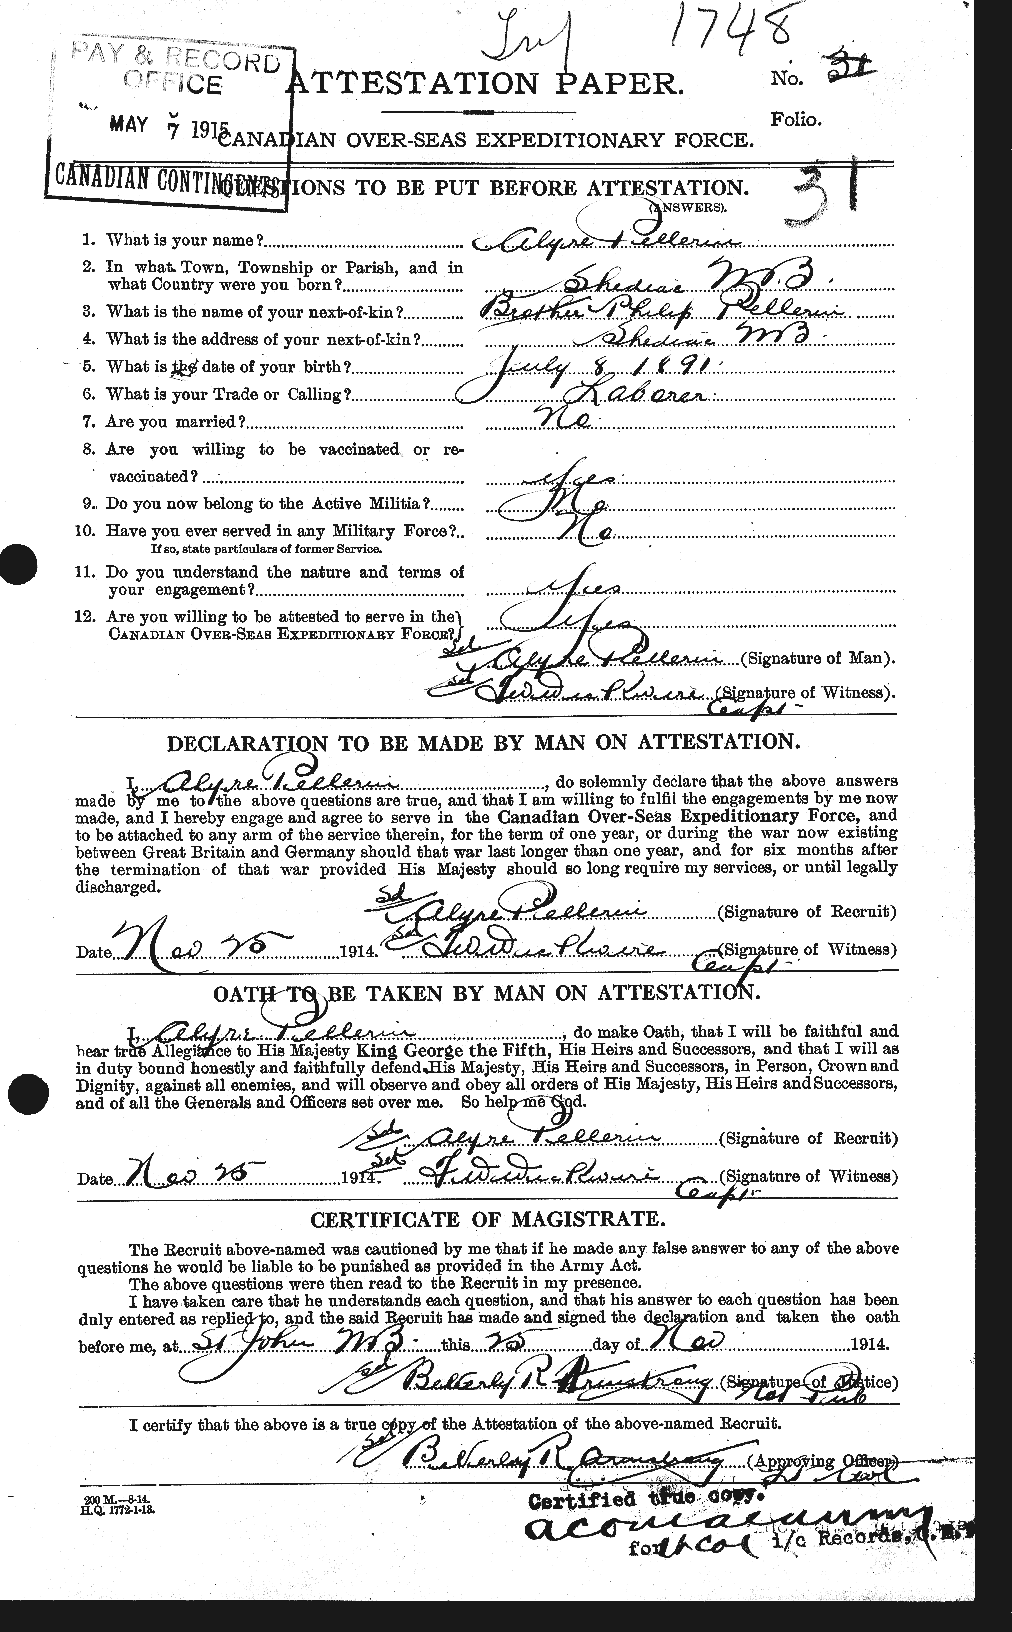 Personnel Records of the First World War - CEF 572230a